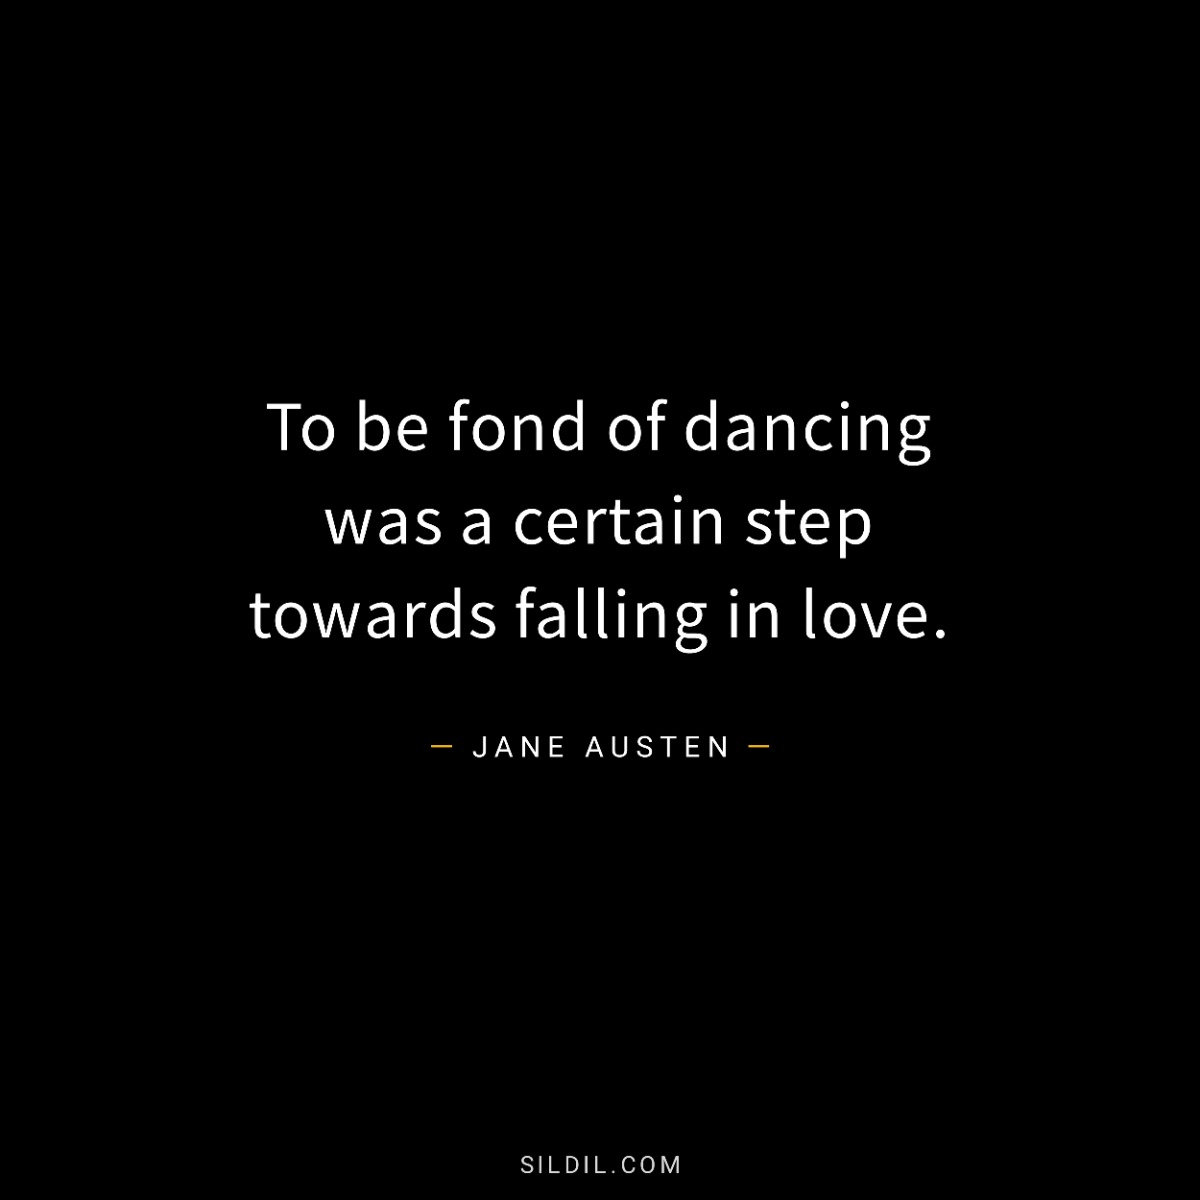 To be fond of dancing was a certain step towards falling in love.